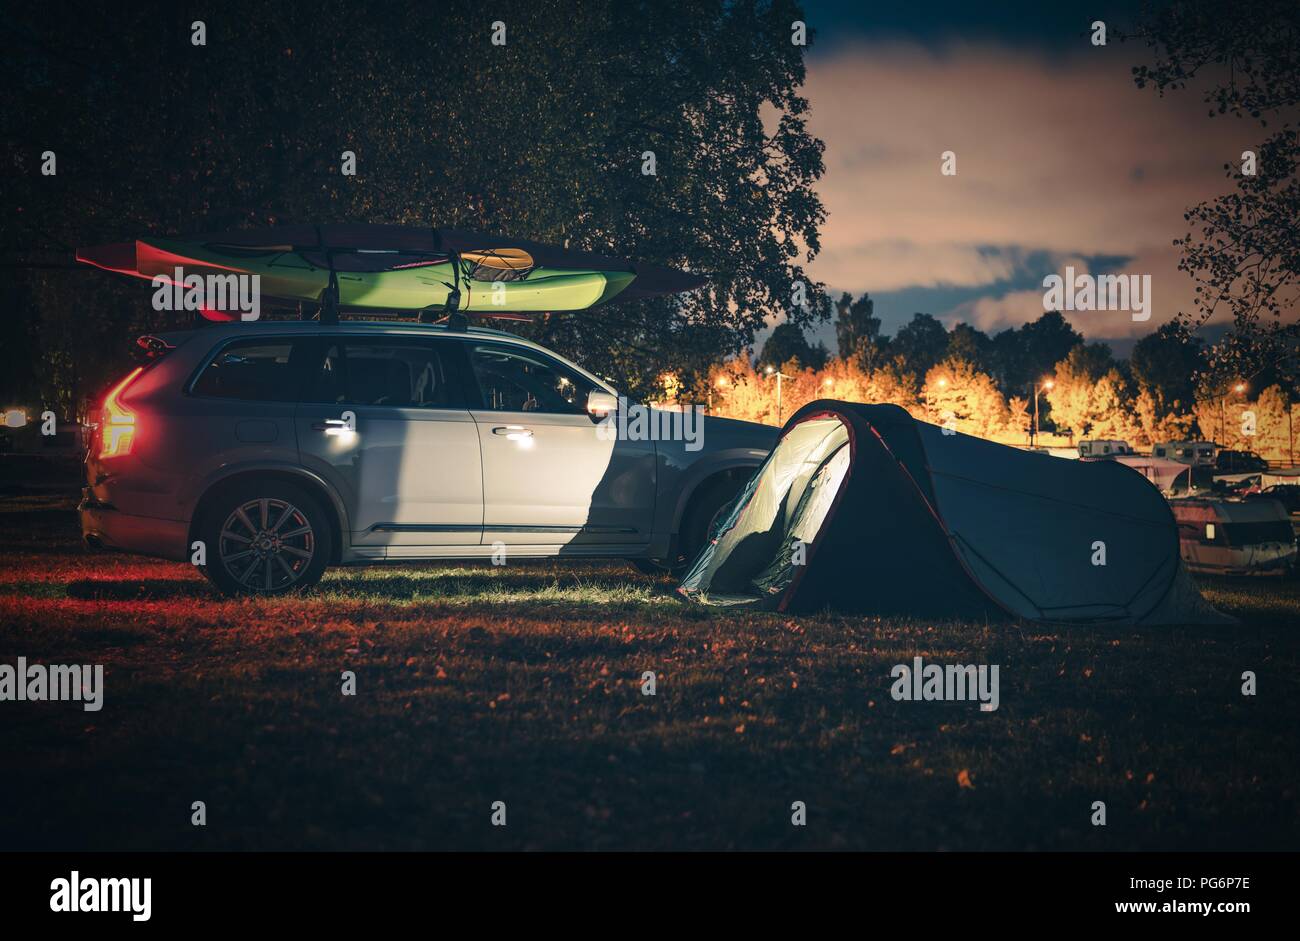 Vacation Campsite with Tent at Night. Modern Tent and Vehicle with Kayaks on the Roof Rack. Stock Photo